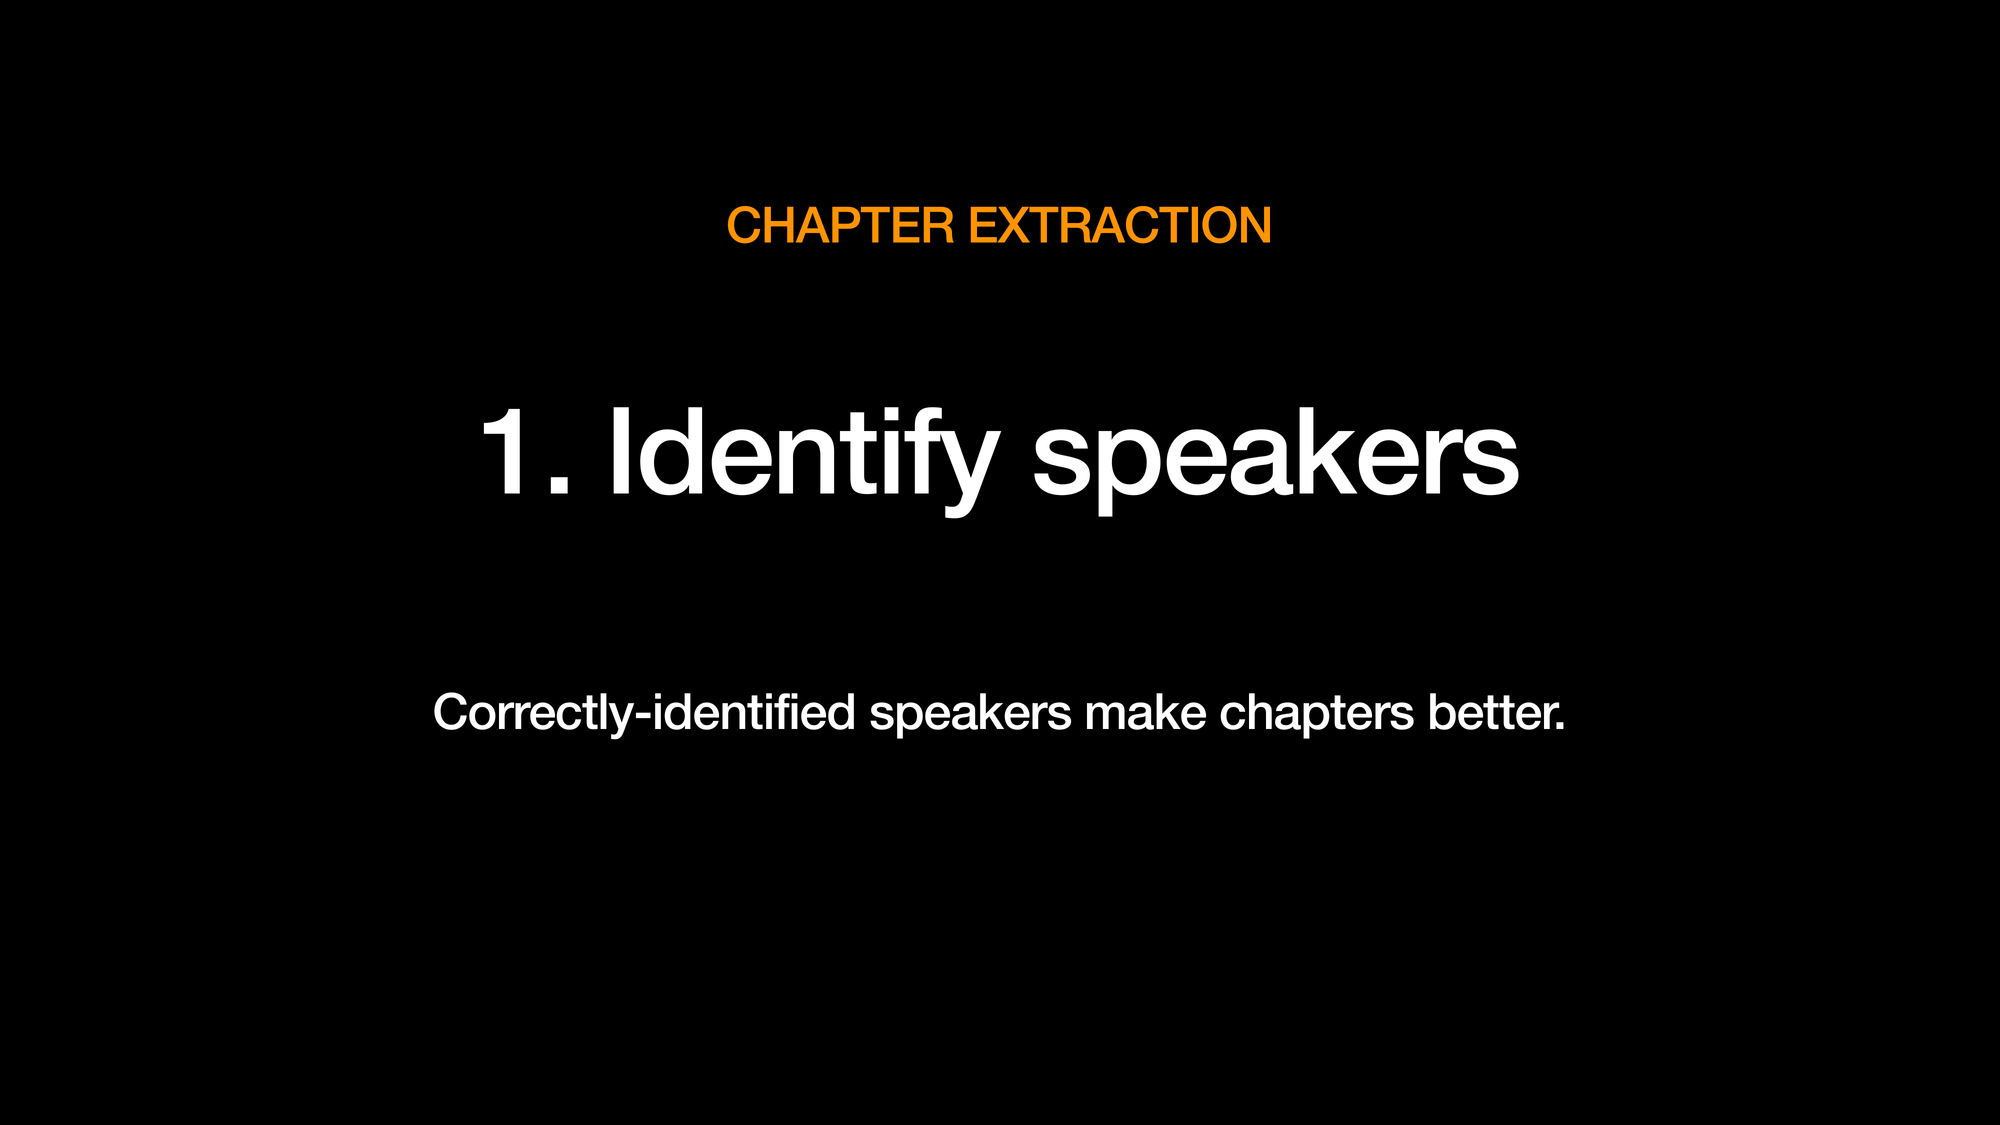 CHAPTER EXTRACTION. 1. Identify speakers. Correctly-identified speakers make chapters better.